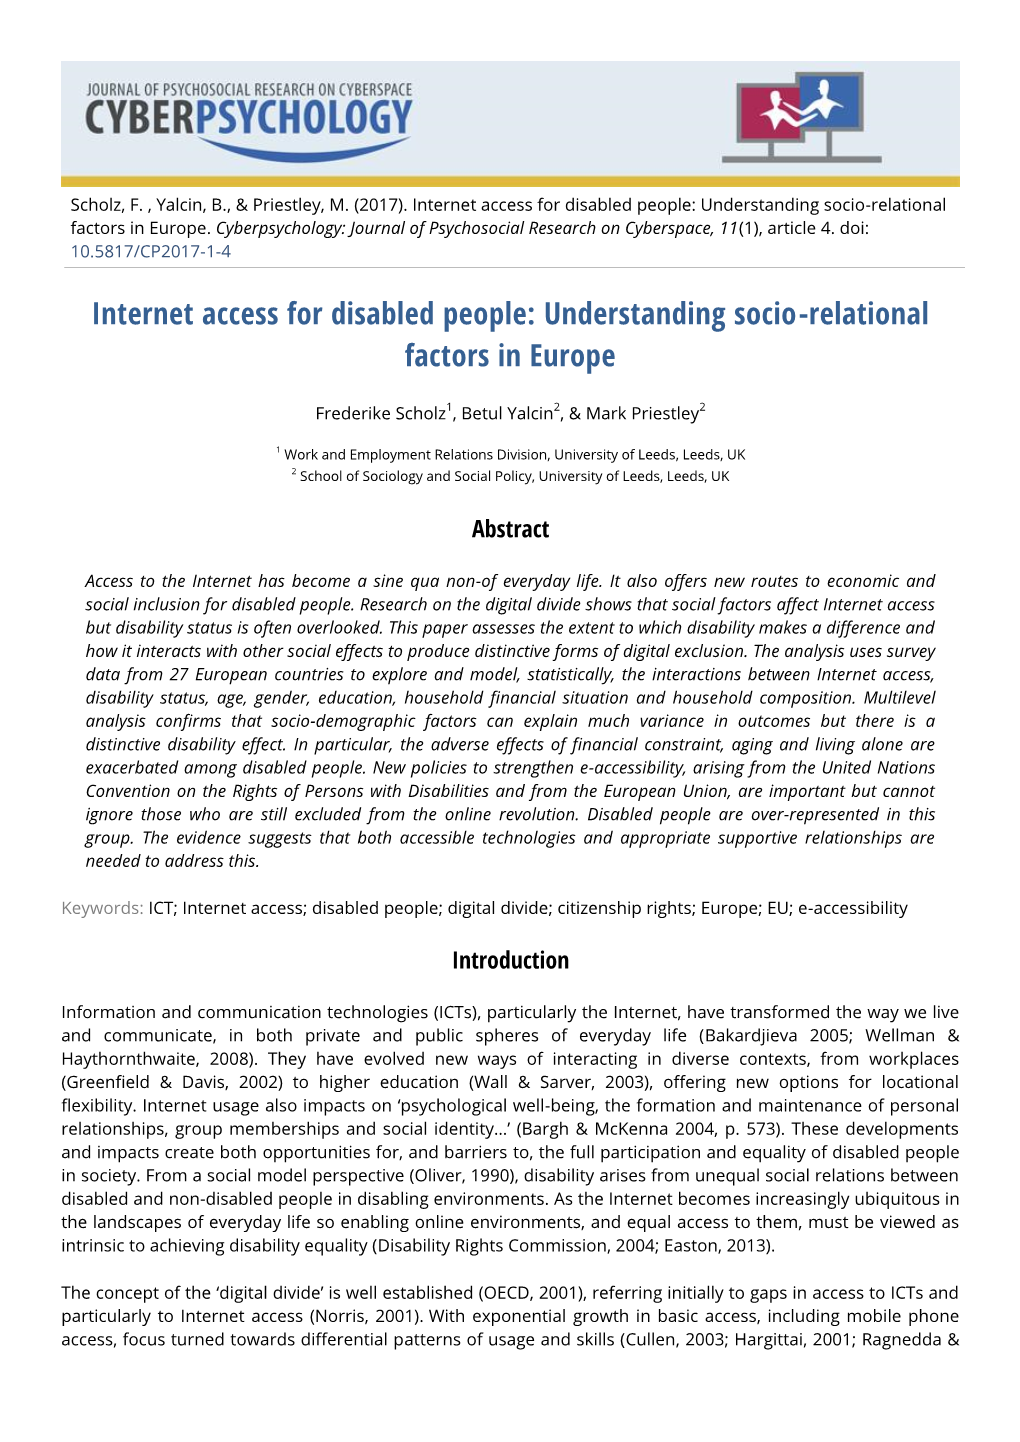 Internet Access for Disabled People: Understanding Socio-Relational Factors in Europe